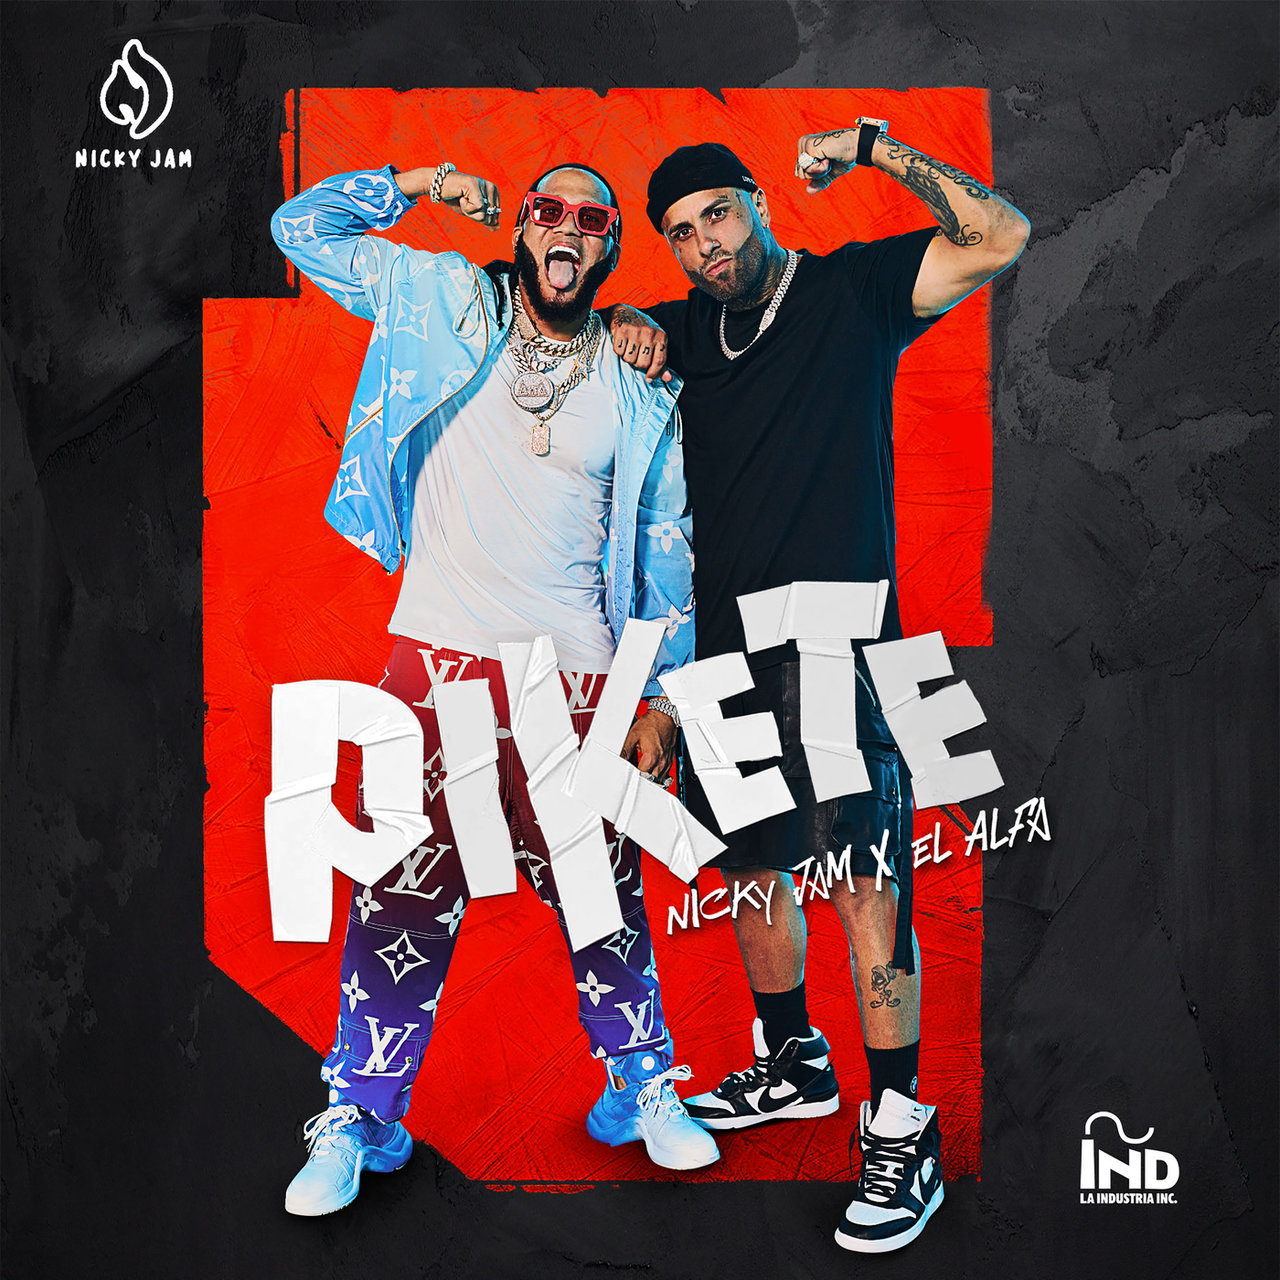 Nicky Jam - Pikete (ft. El Alfa) (Cover)